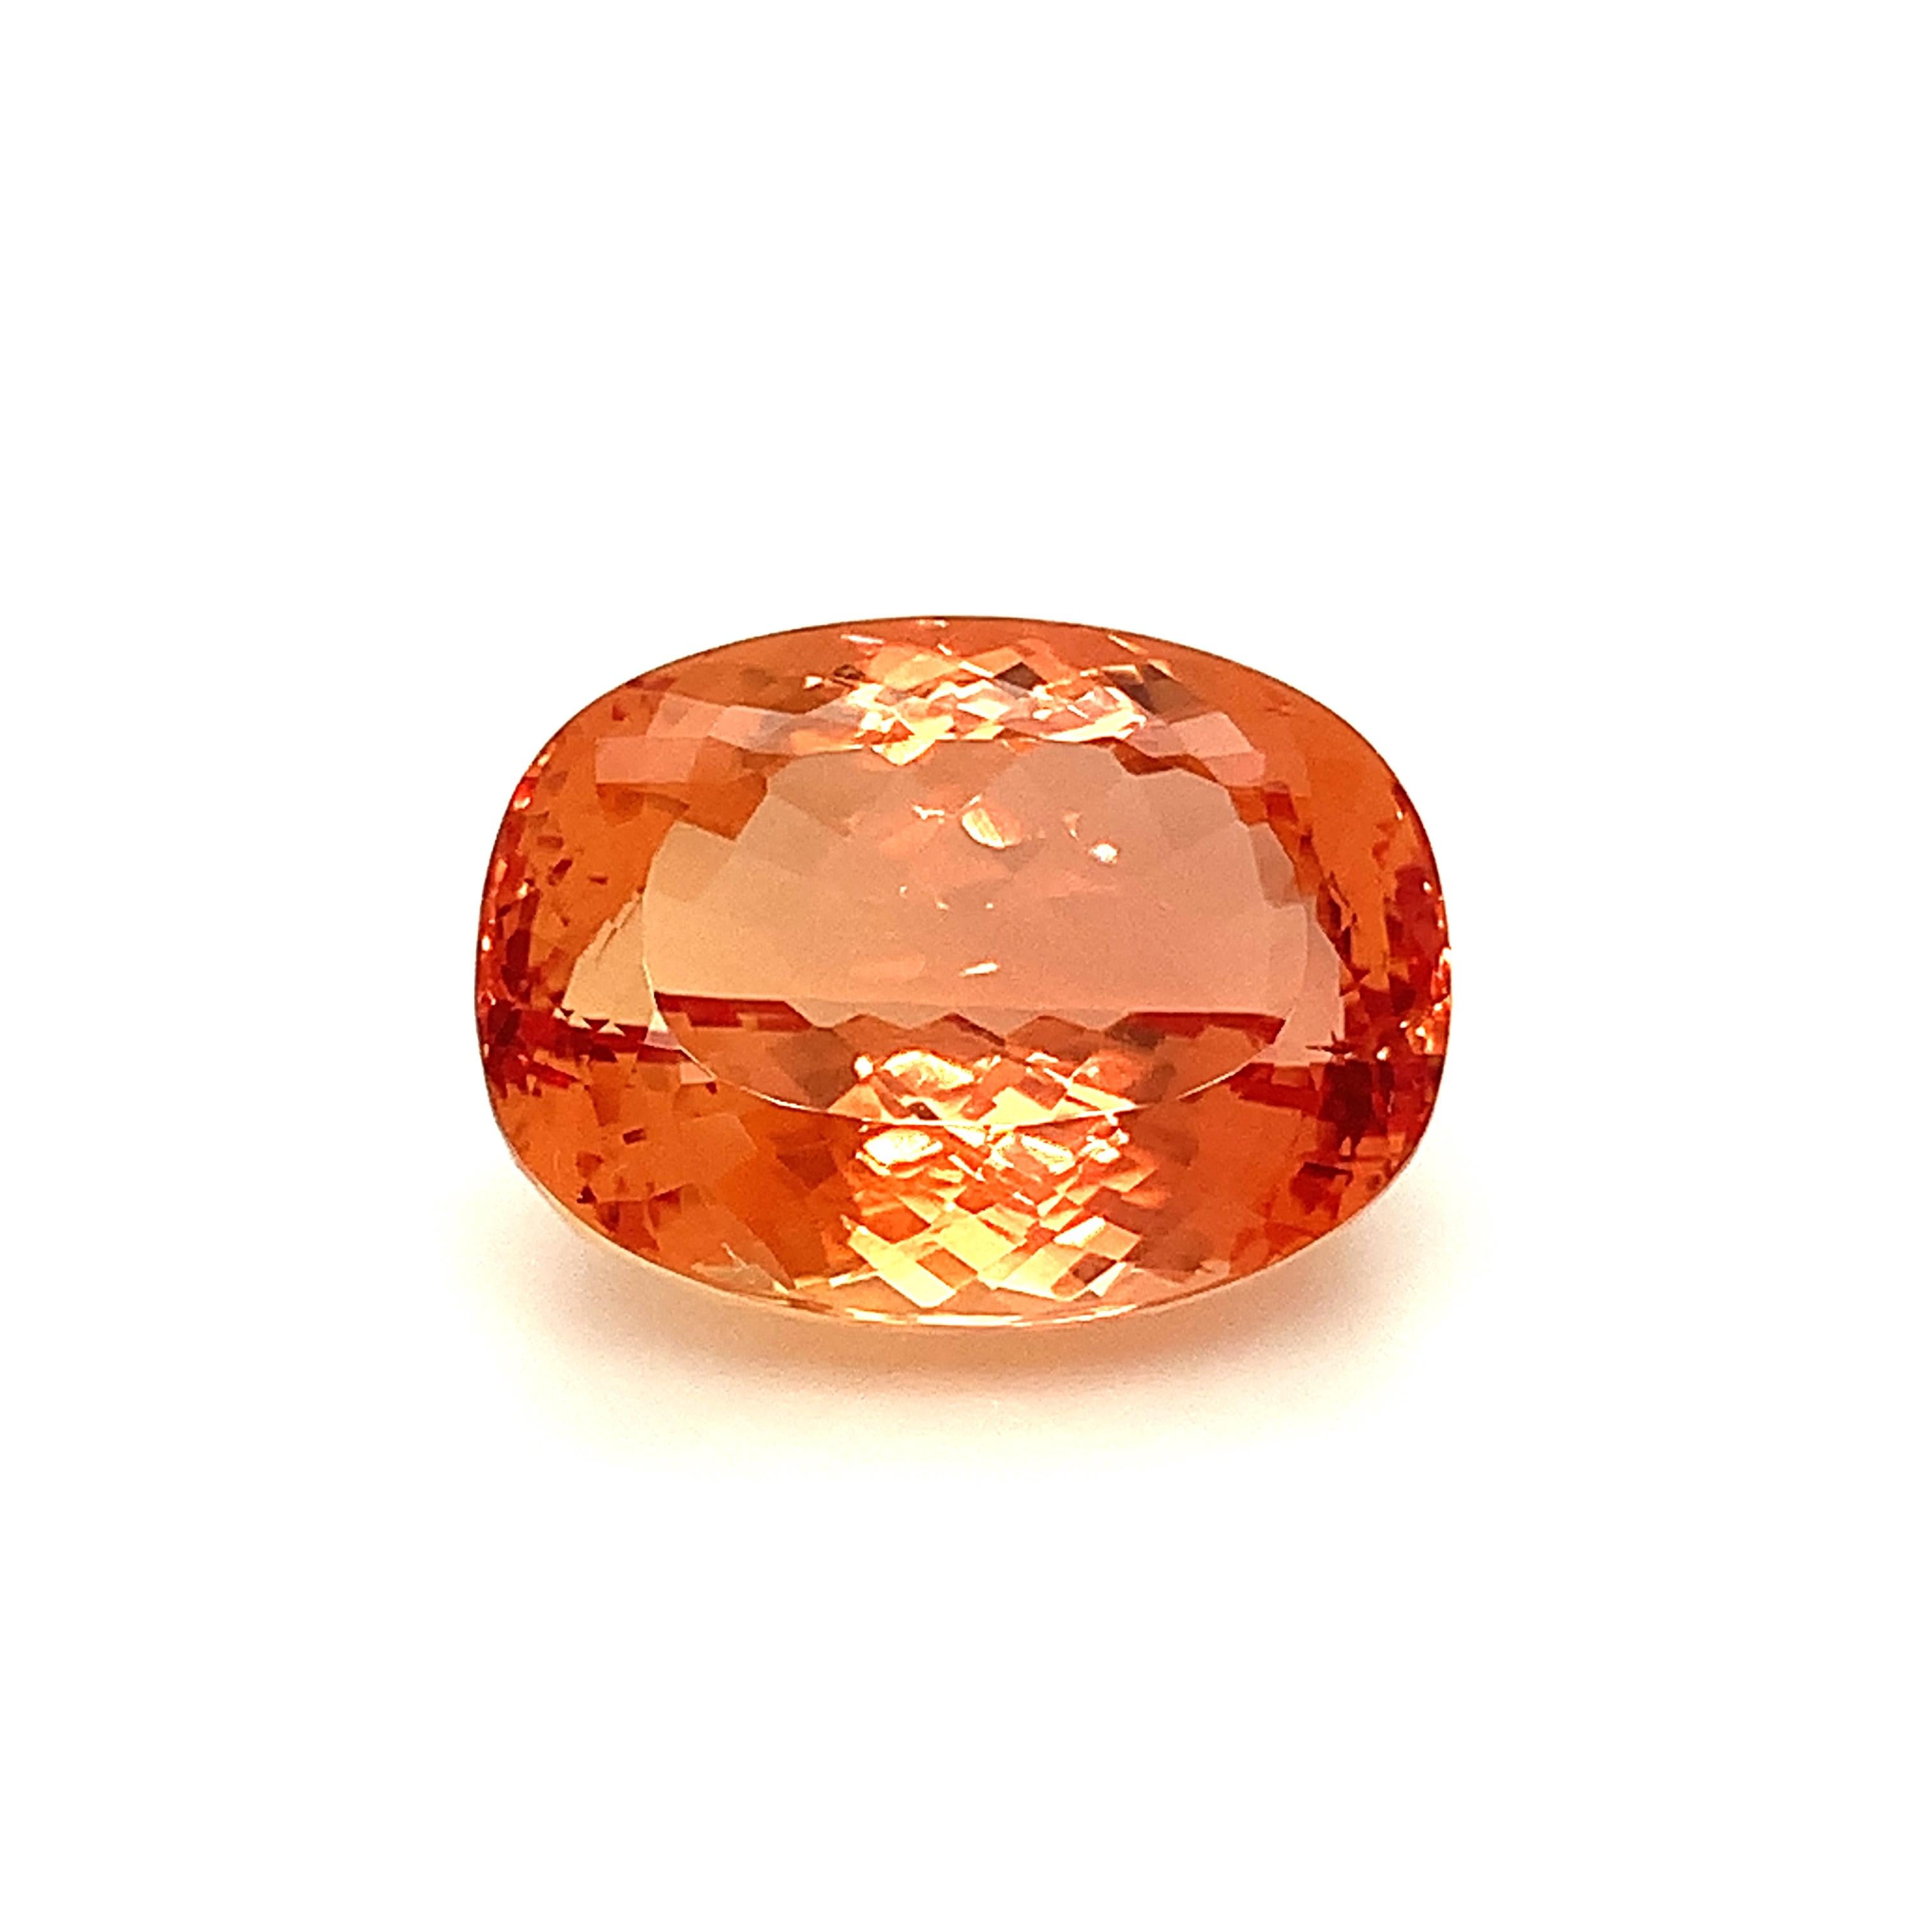 Artisan 33.95 Carat Imperial Topaz Cushion, Unset Loose Gemstone, GIA Certified For Sale